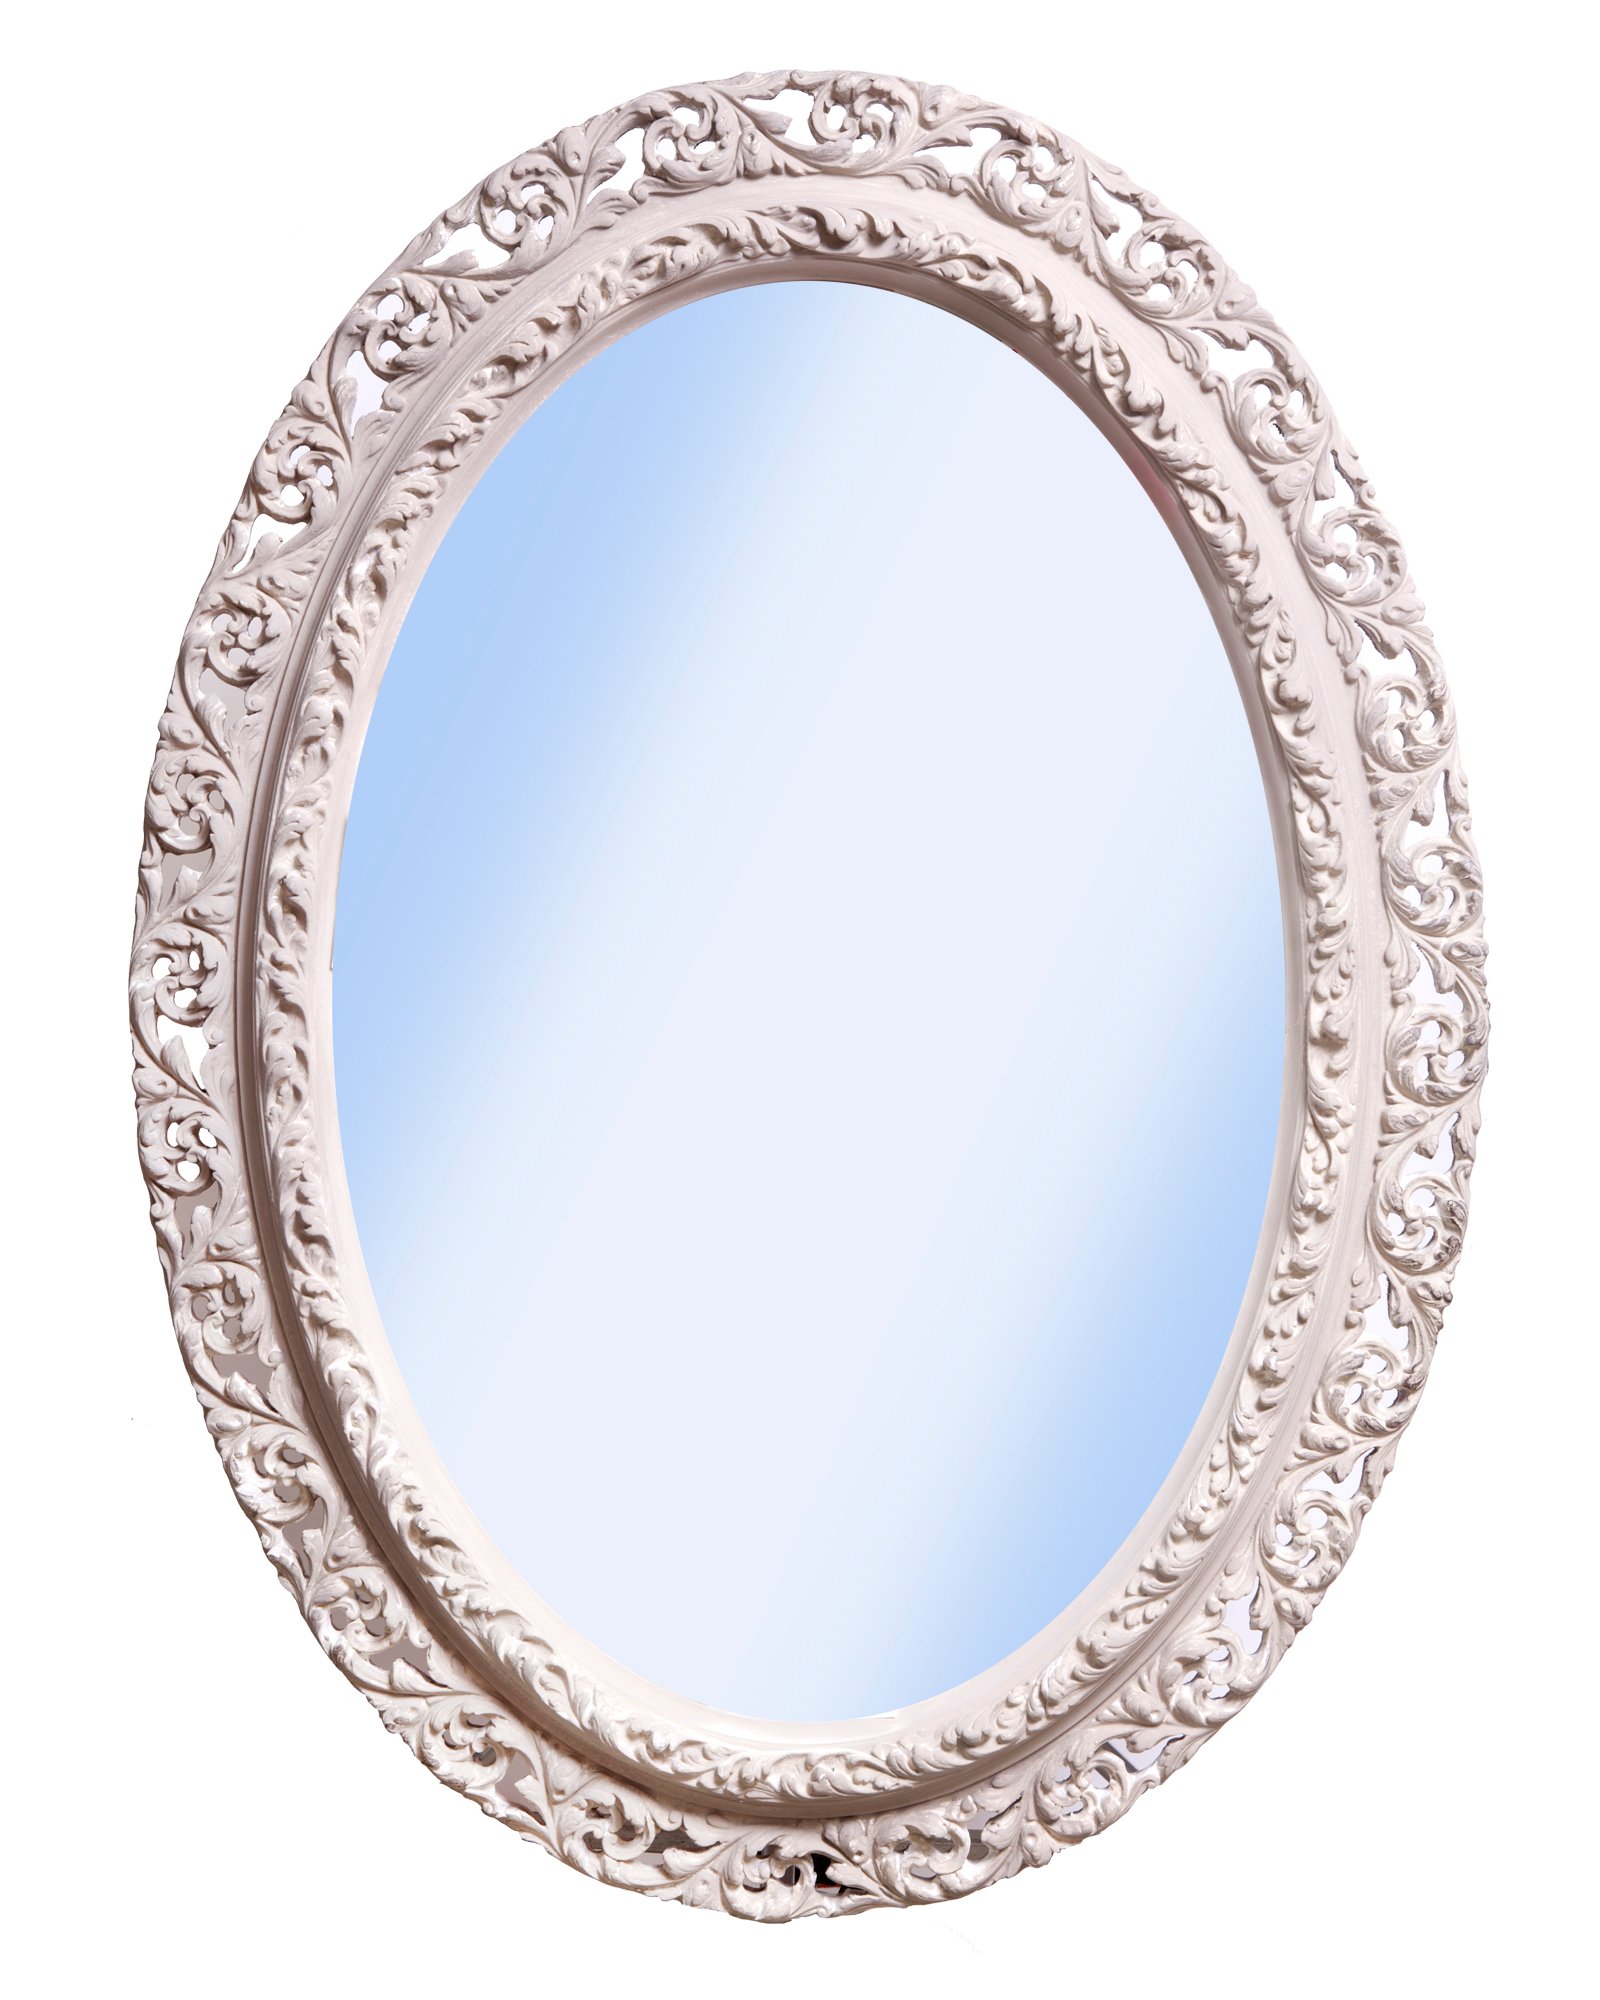 Antique French Revival Oval Mirror~P77597722